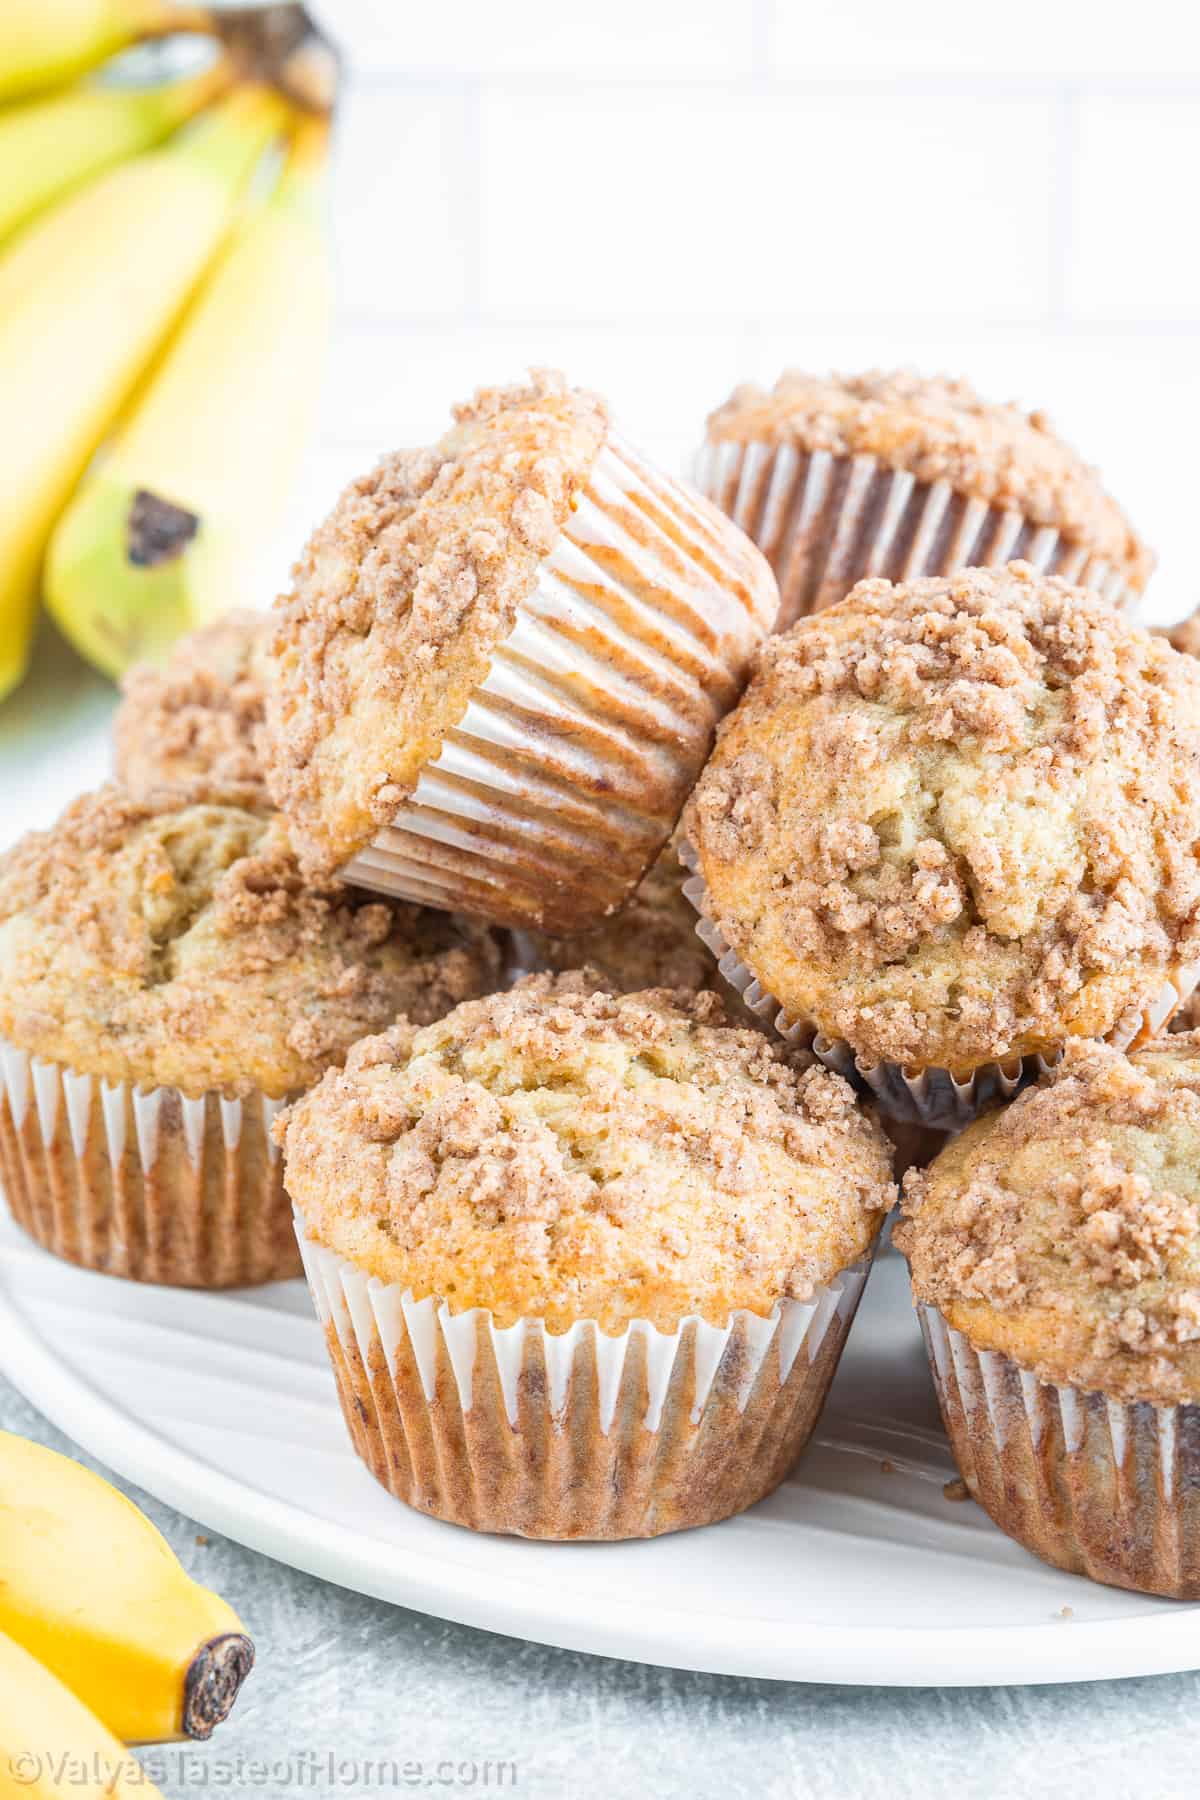 These banana crumb muffins are a surefire way to turn those overripe bananas into a treat your family will request time and time again.